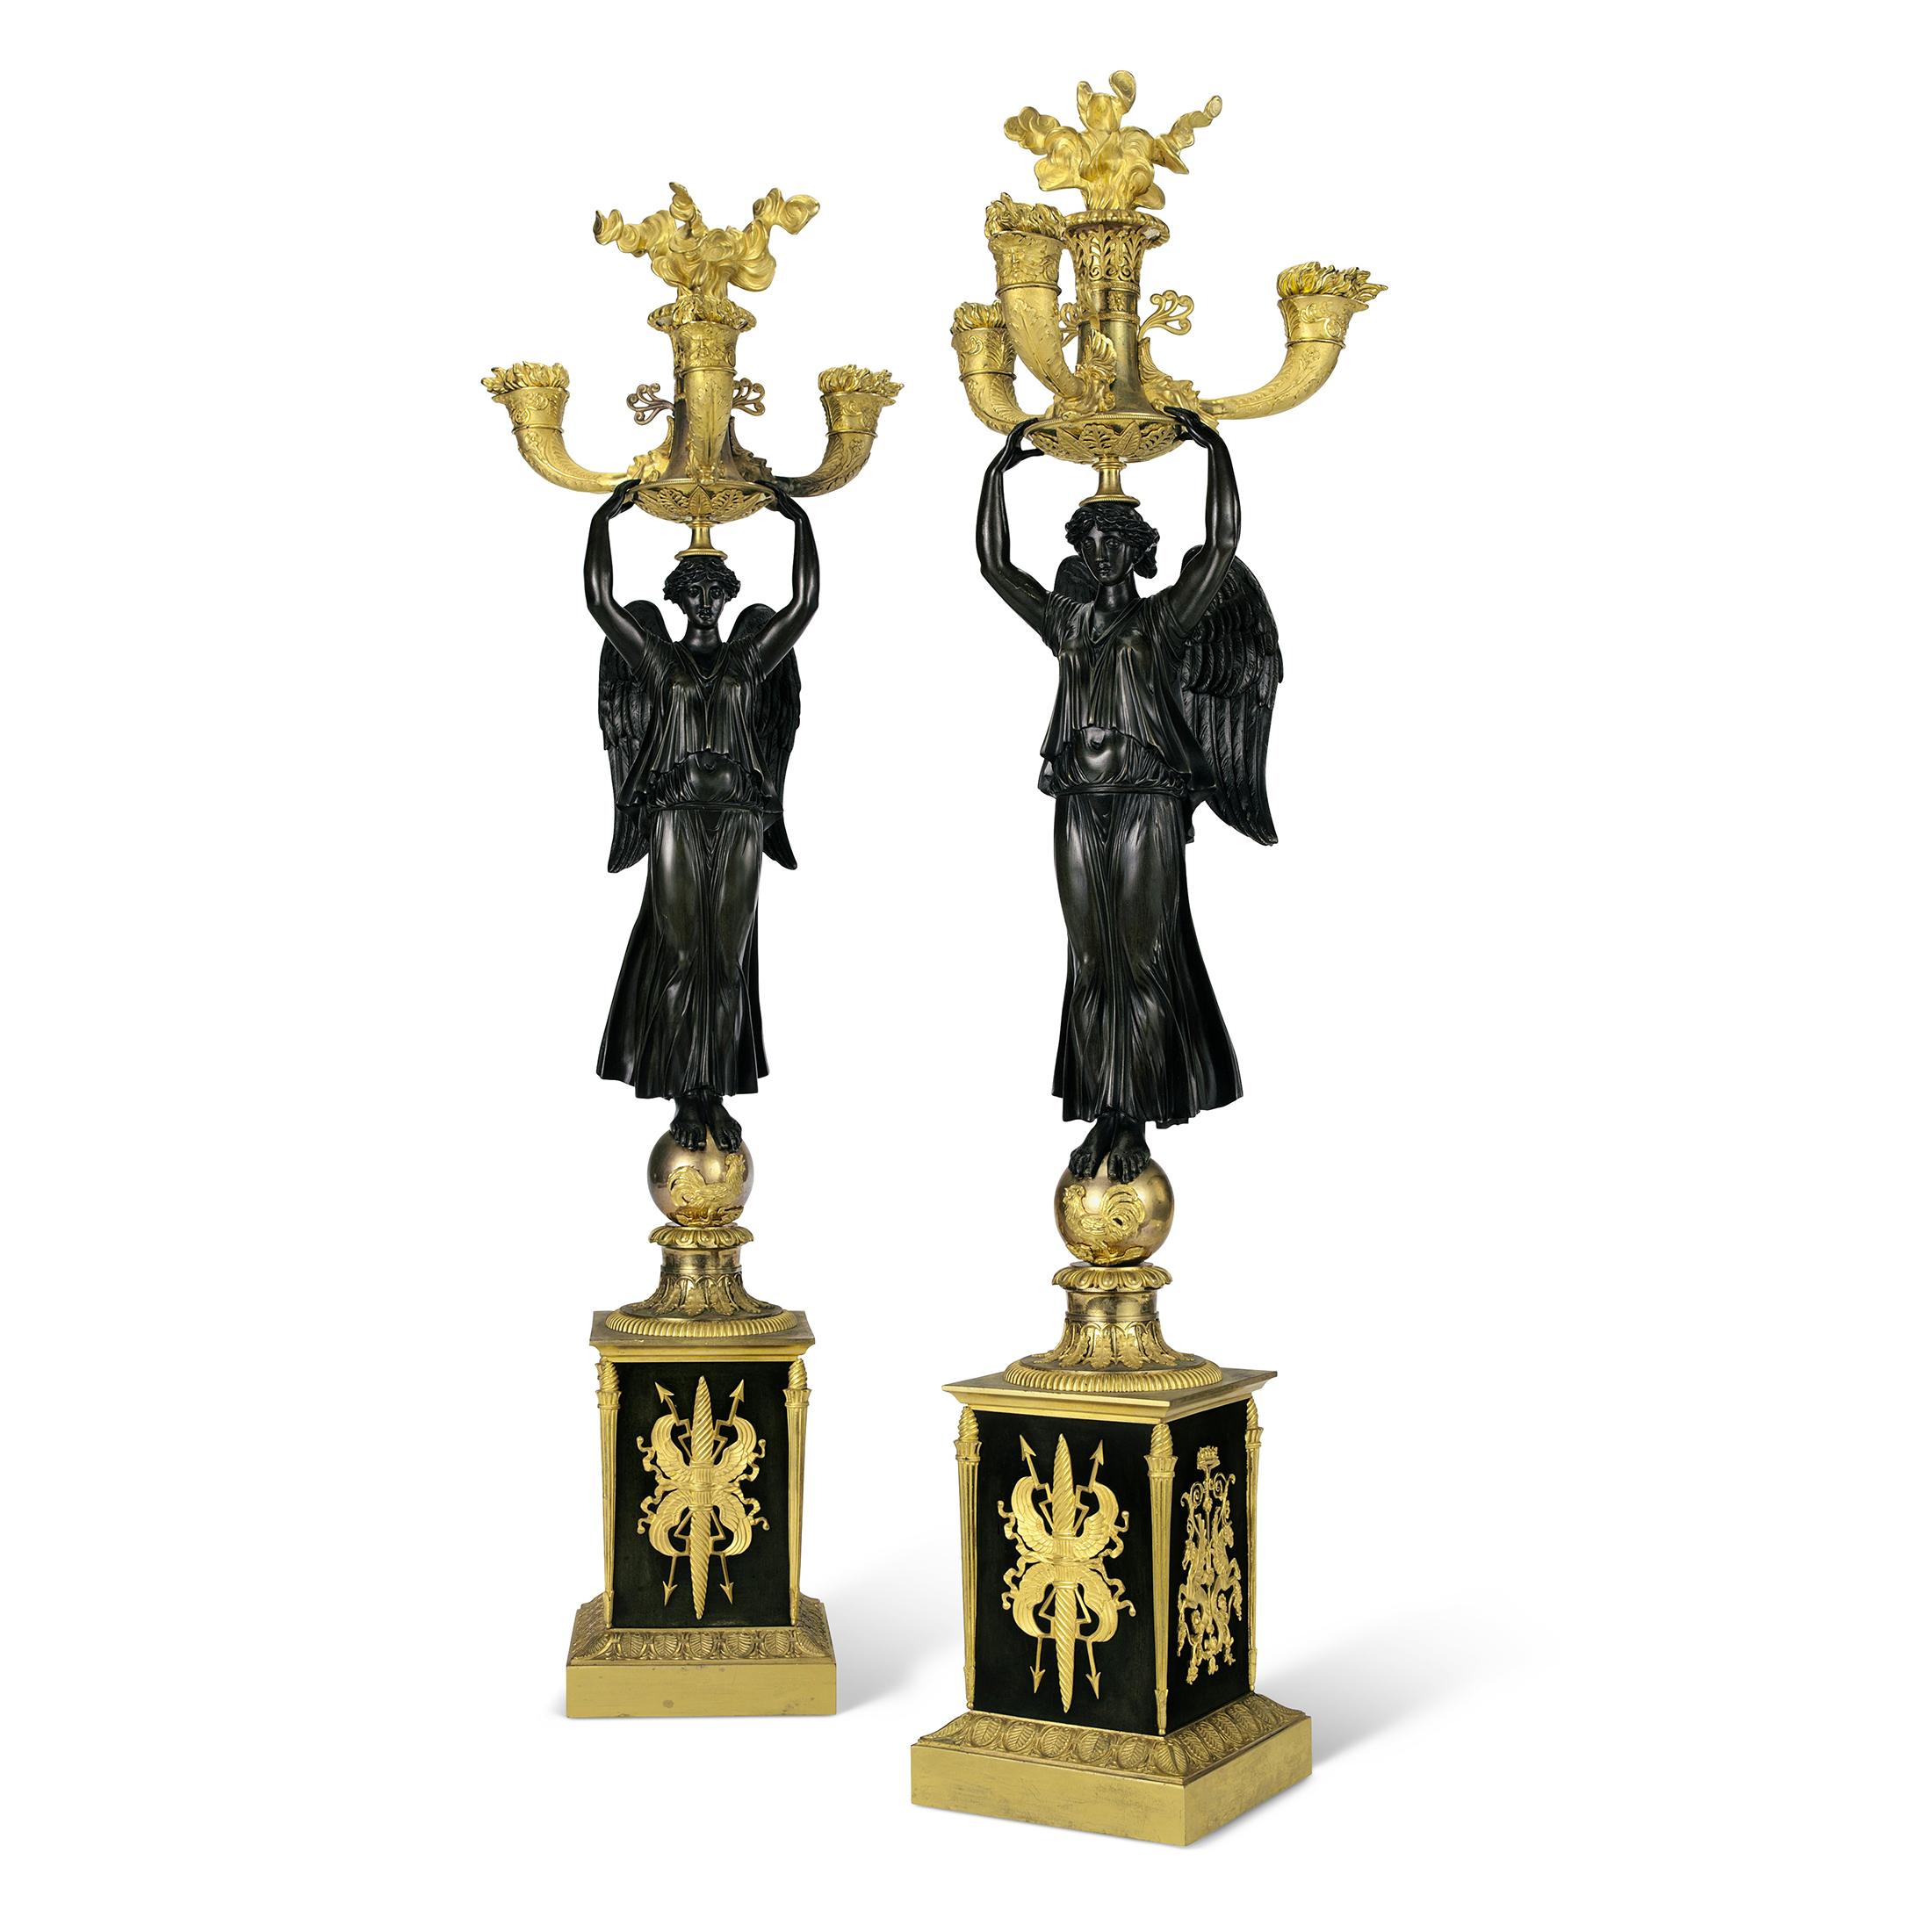     This exquisite pair of Empire four light Candelabras with winged maiden standing on a globe with a rooster mount surmounted on a square bases are fabulous pair! Burning cornucopias form the four candleholders on each candelabra, surmounted by a